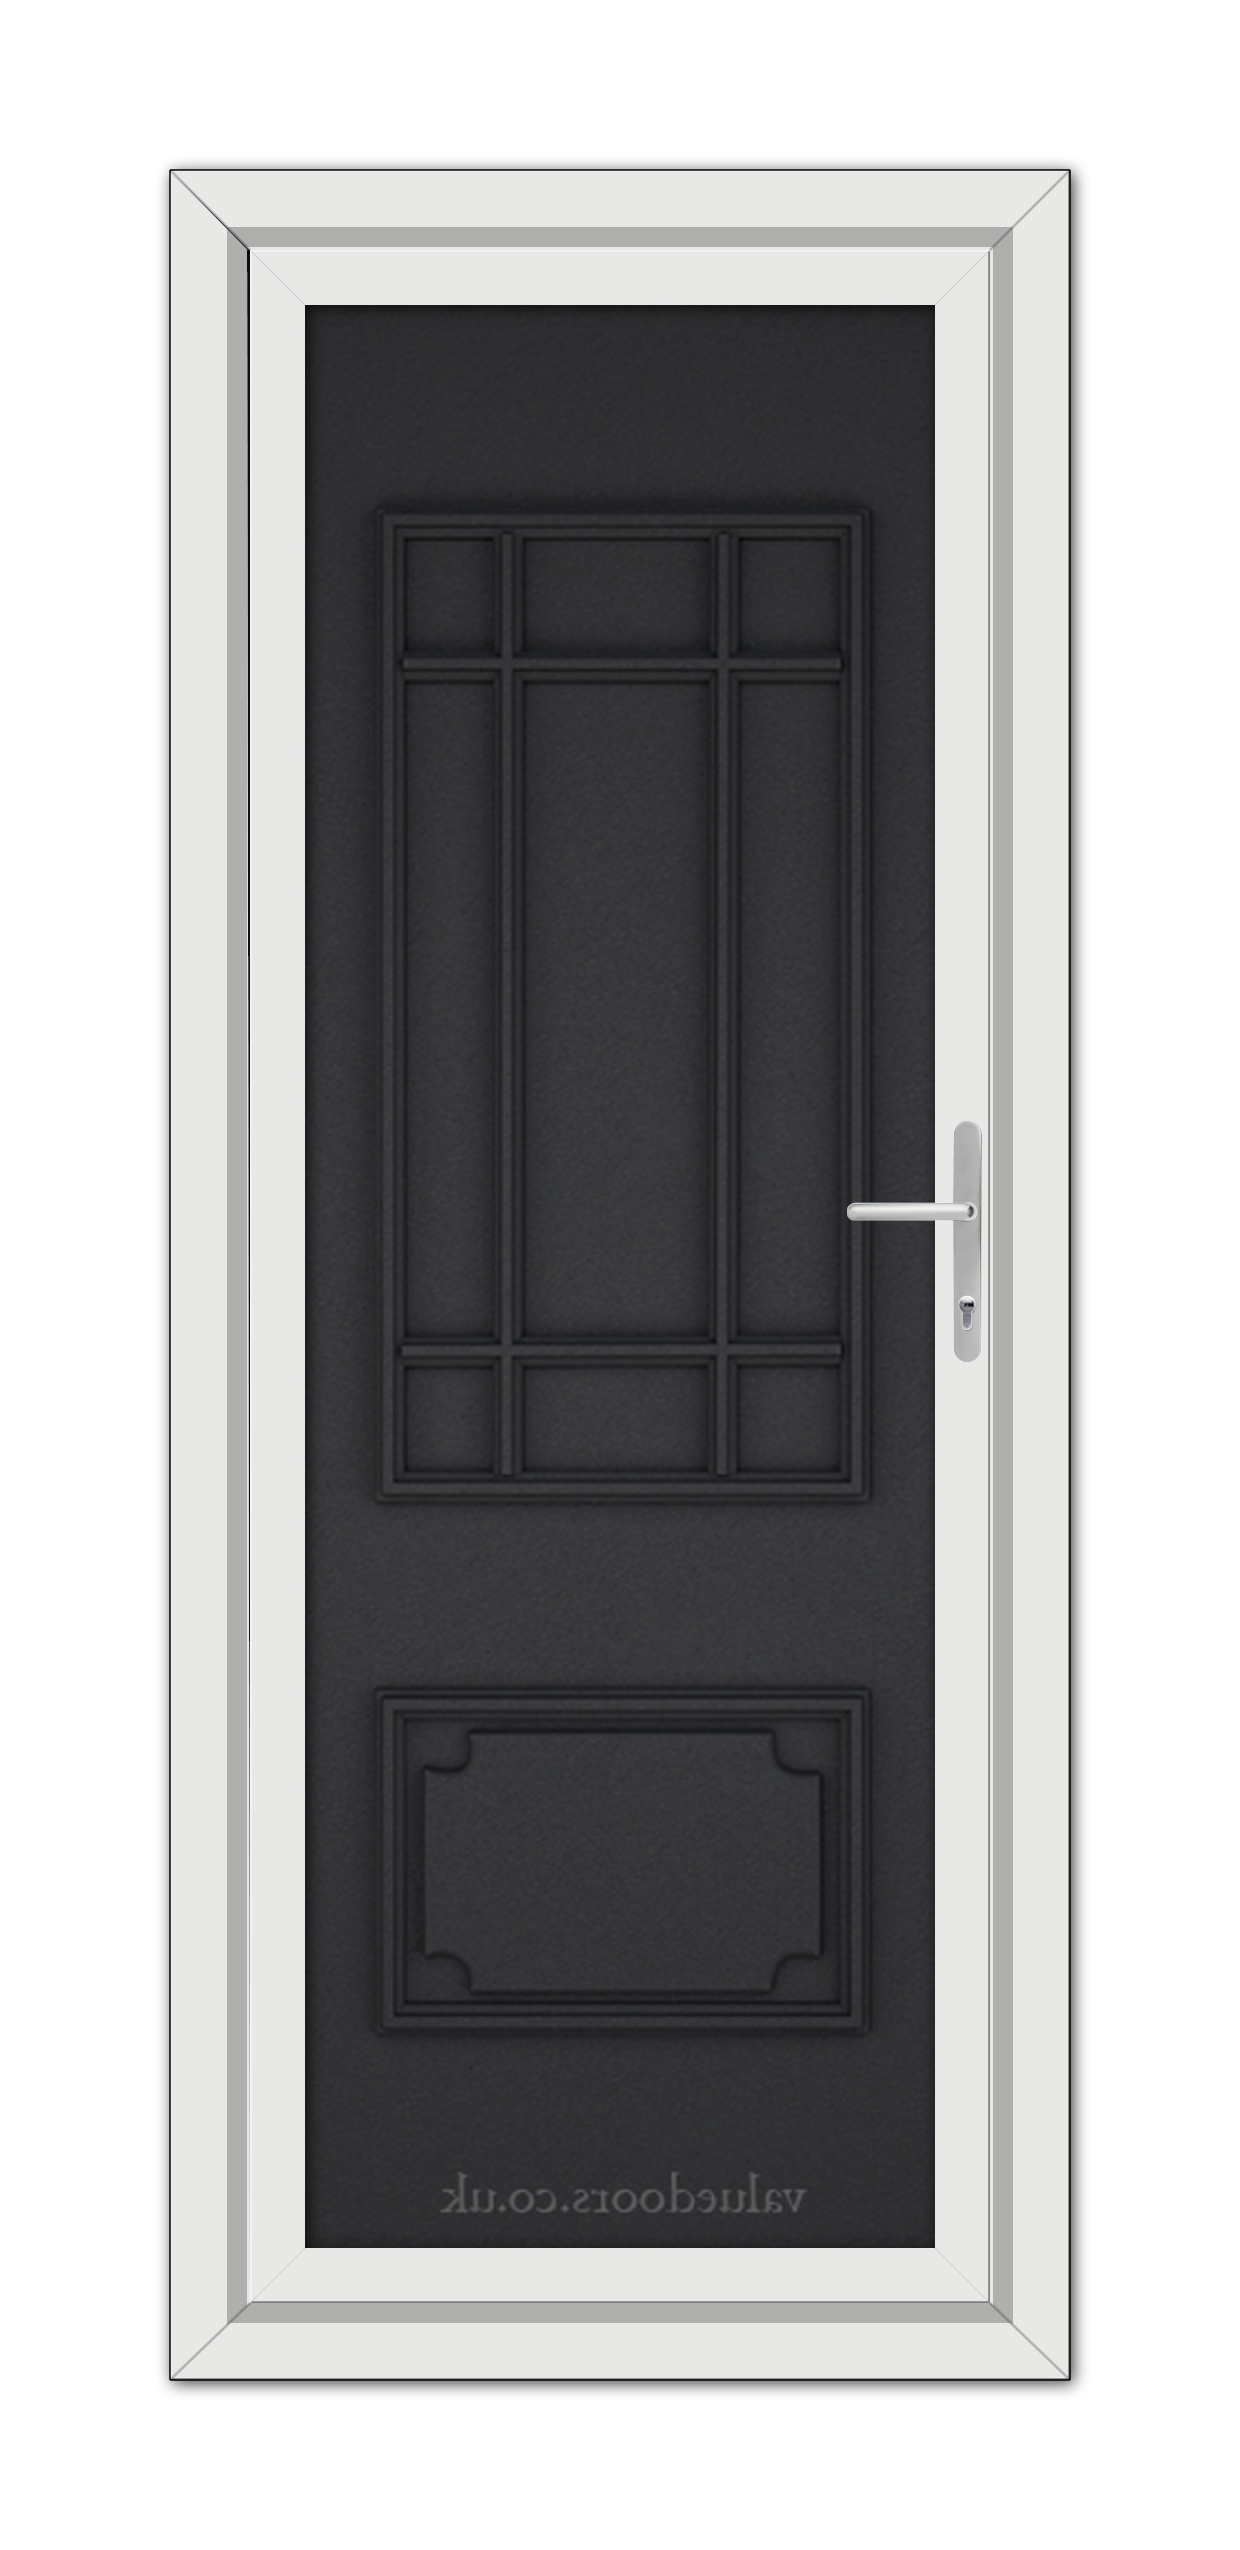 A modern Black Brown Seville Solid uPVC door with multiple panels and a silver handle, framed within a white door frame.